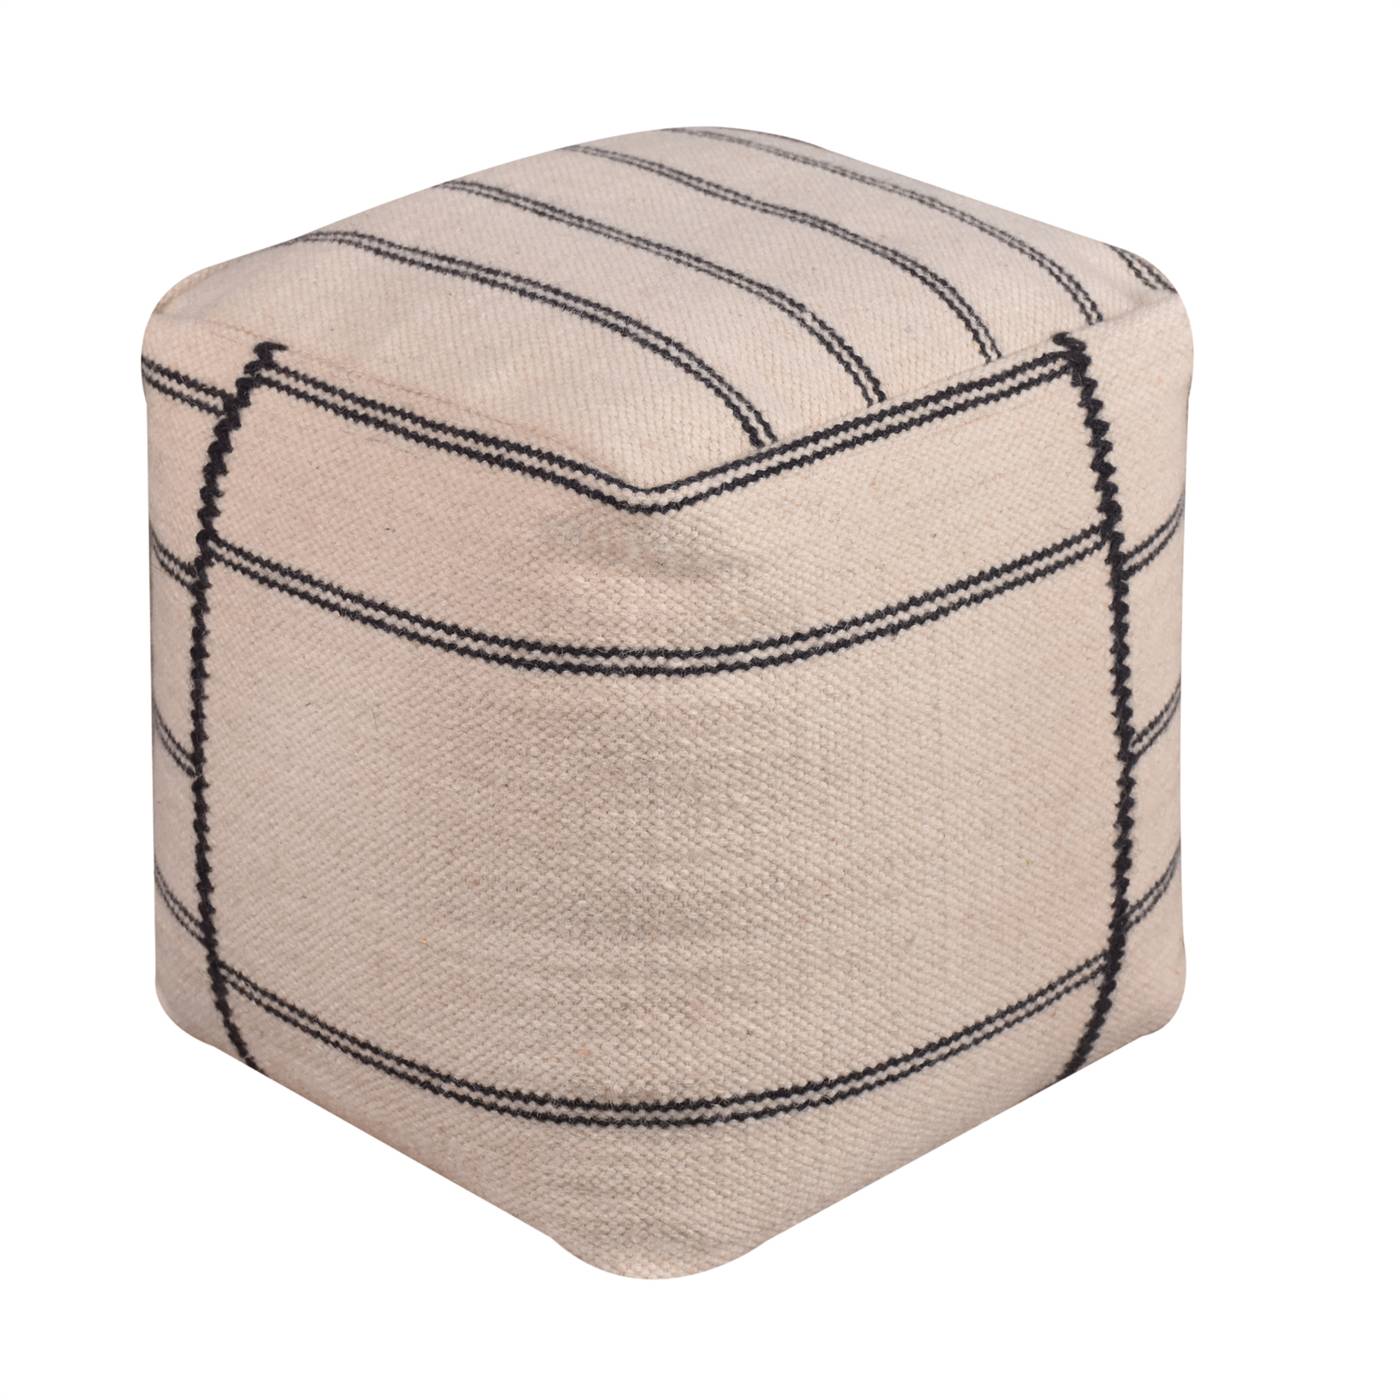 Barite Pouf, 40x40x40 cm, Natural White, Charcoal, Wool, Hand Woven, Pitloom, Flat Weave